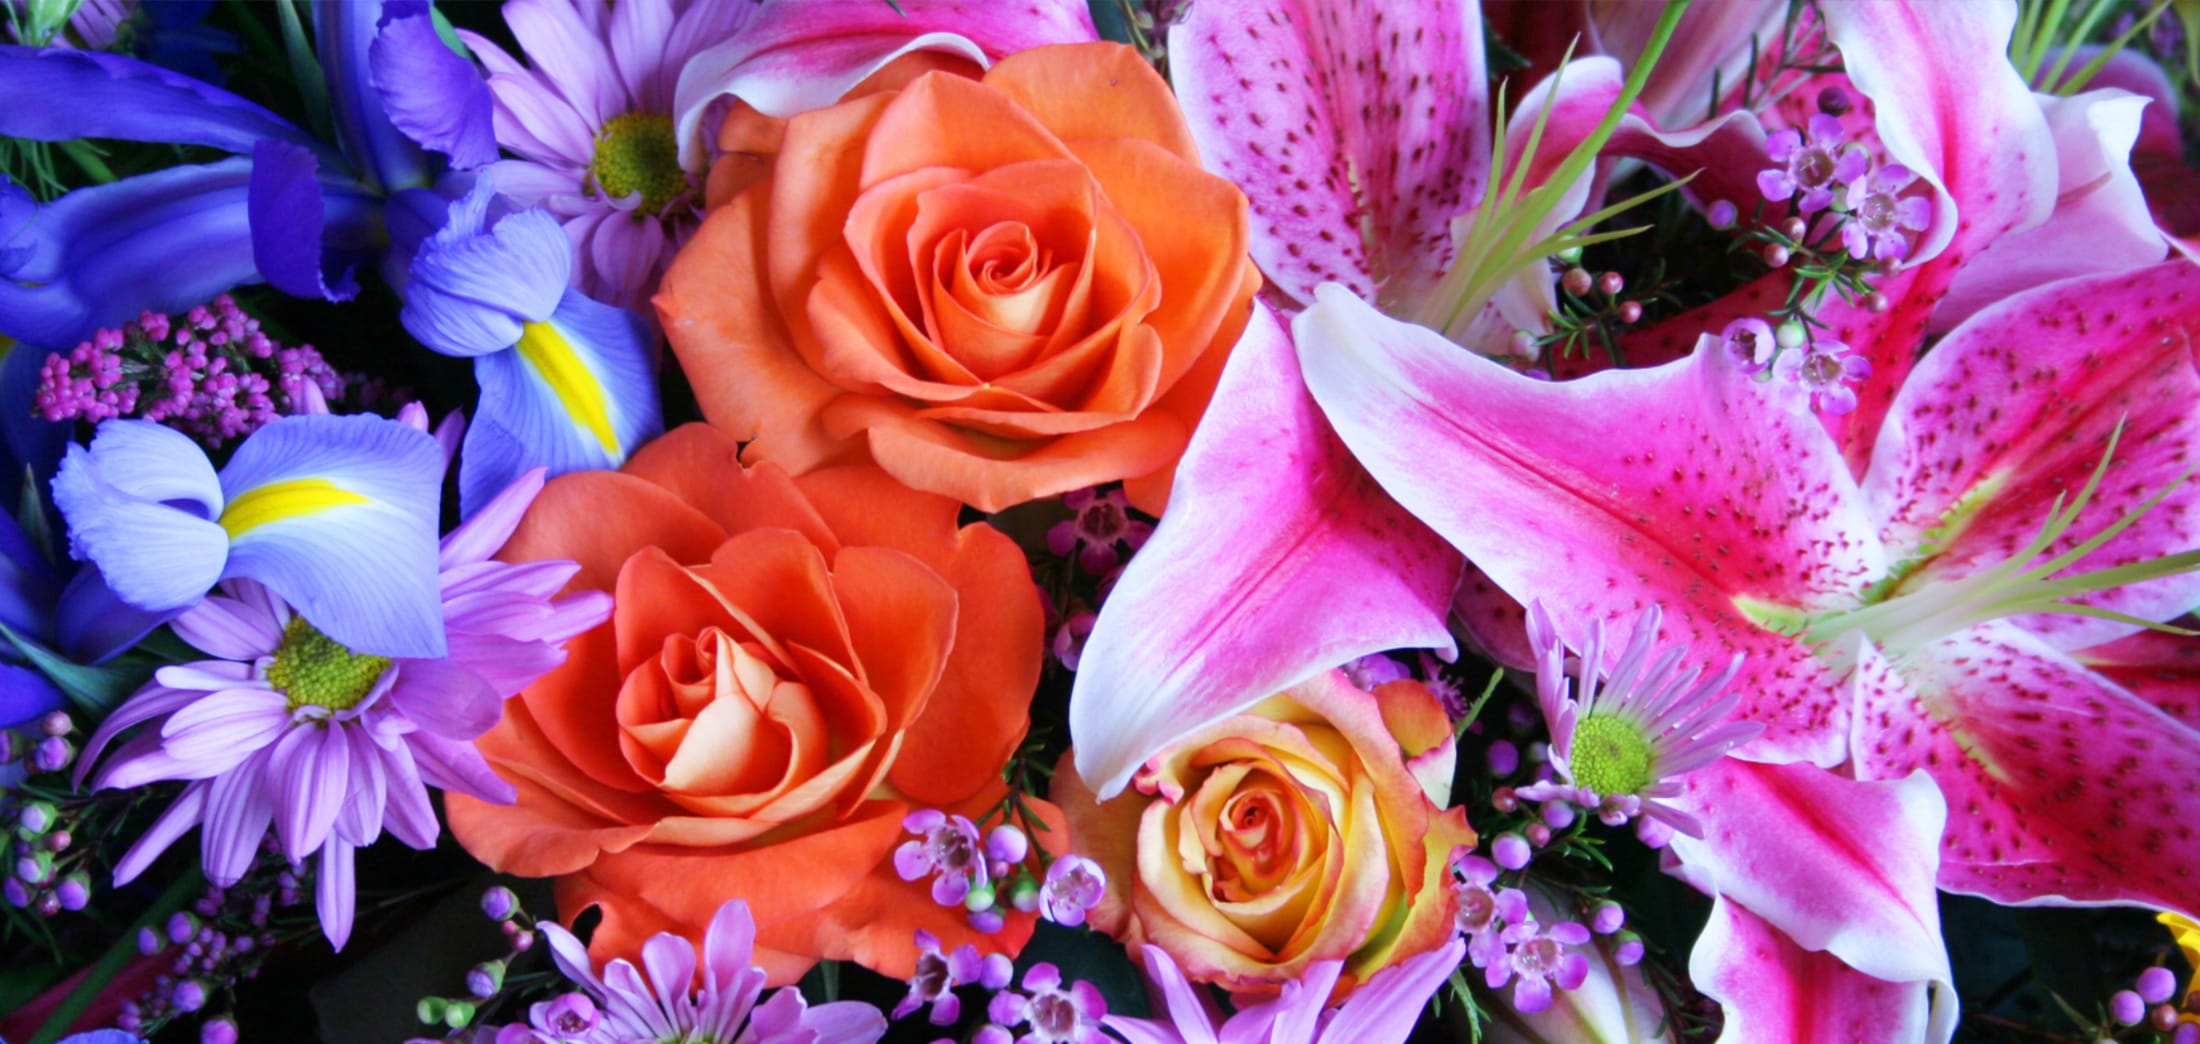 Dallas Florist | Flower Delivery by All Occasions Florist